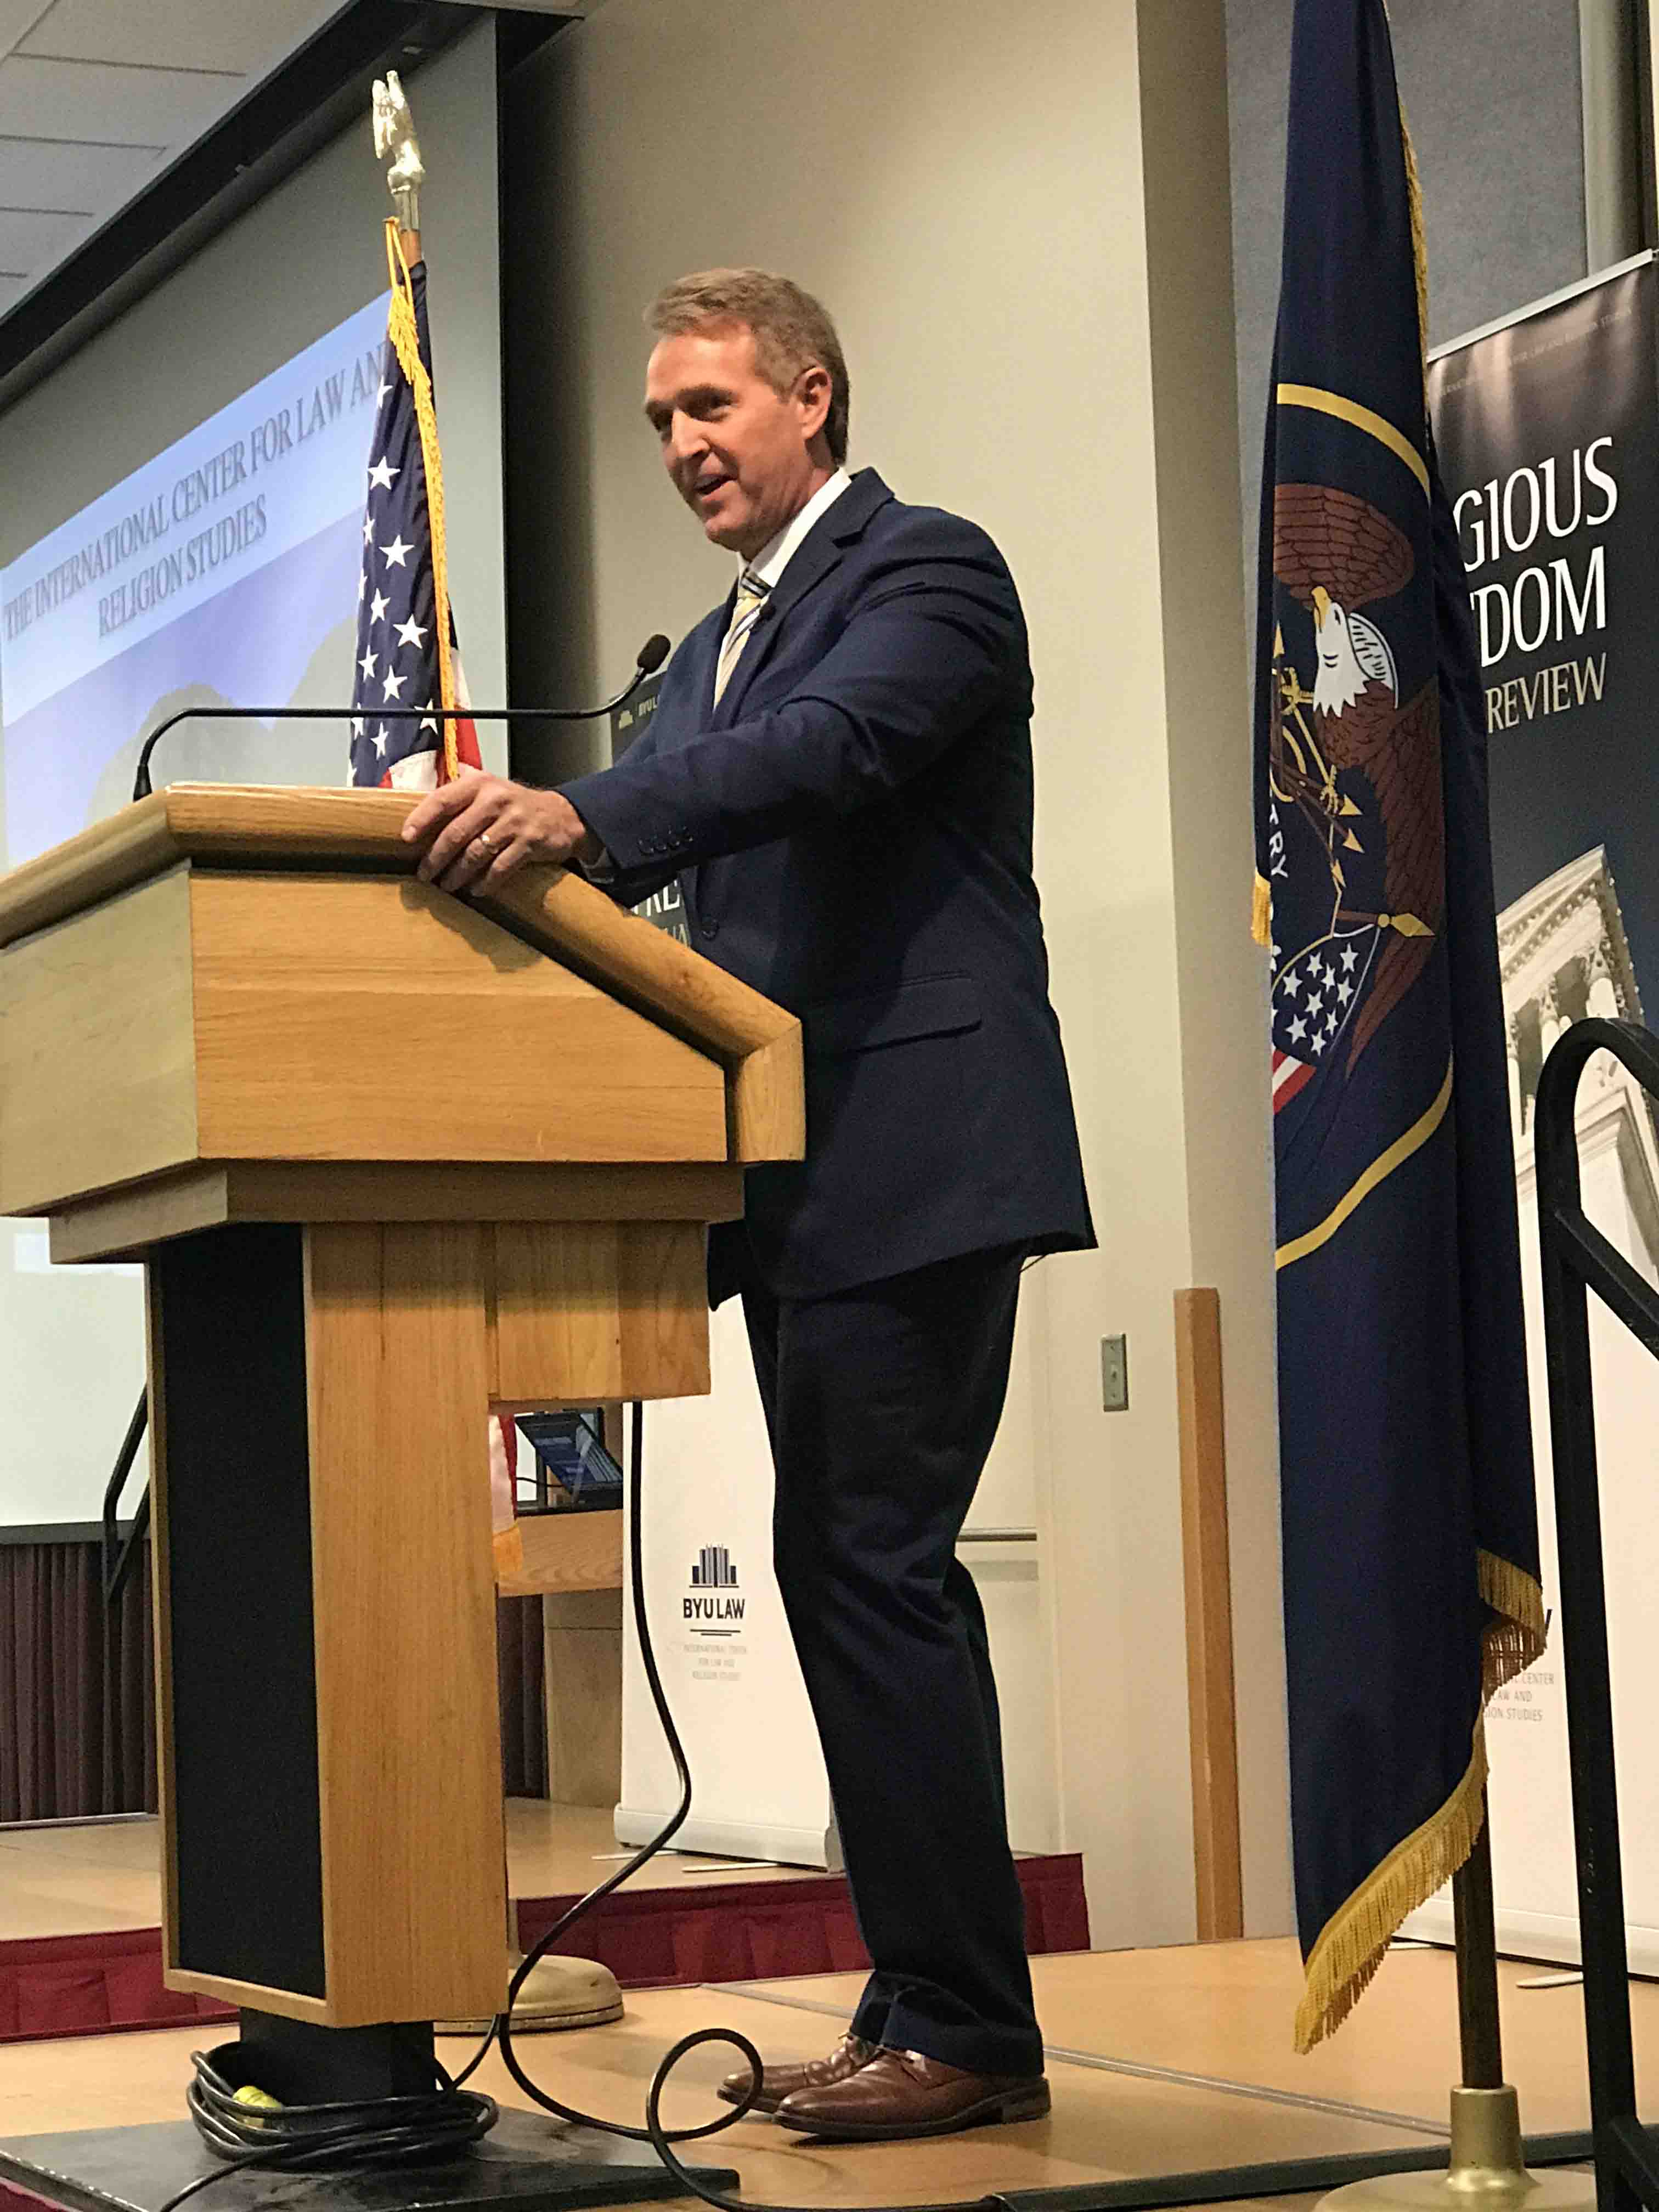 Image for Senator Jeff Flake Keynotes at 2017 Religious Freedom Annual Review